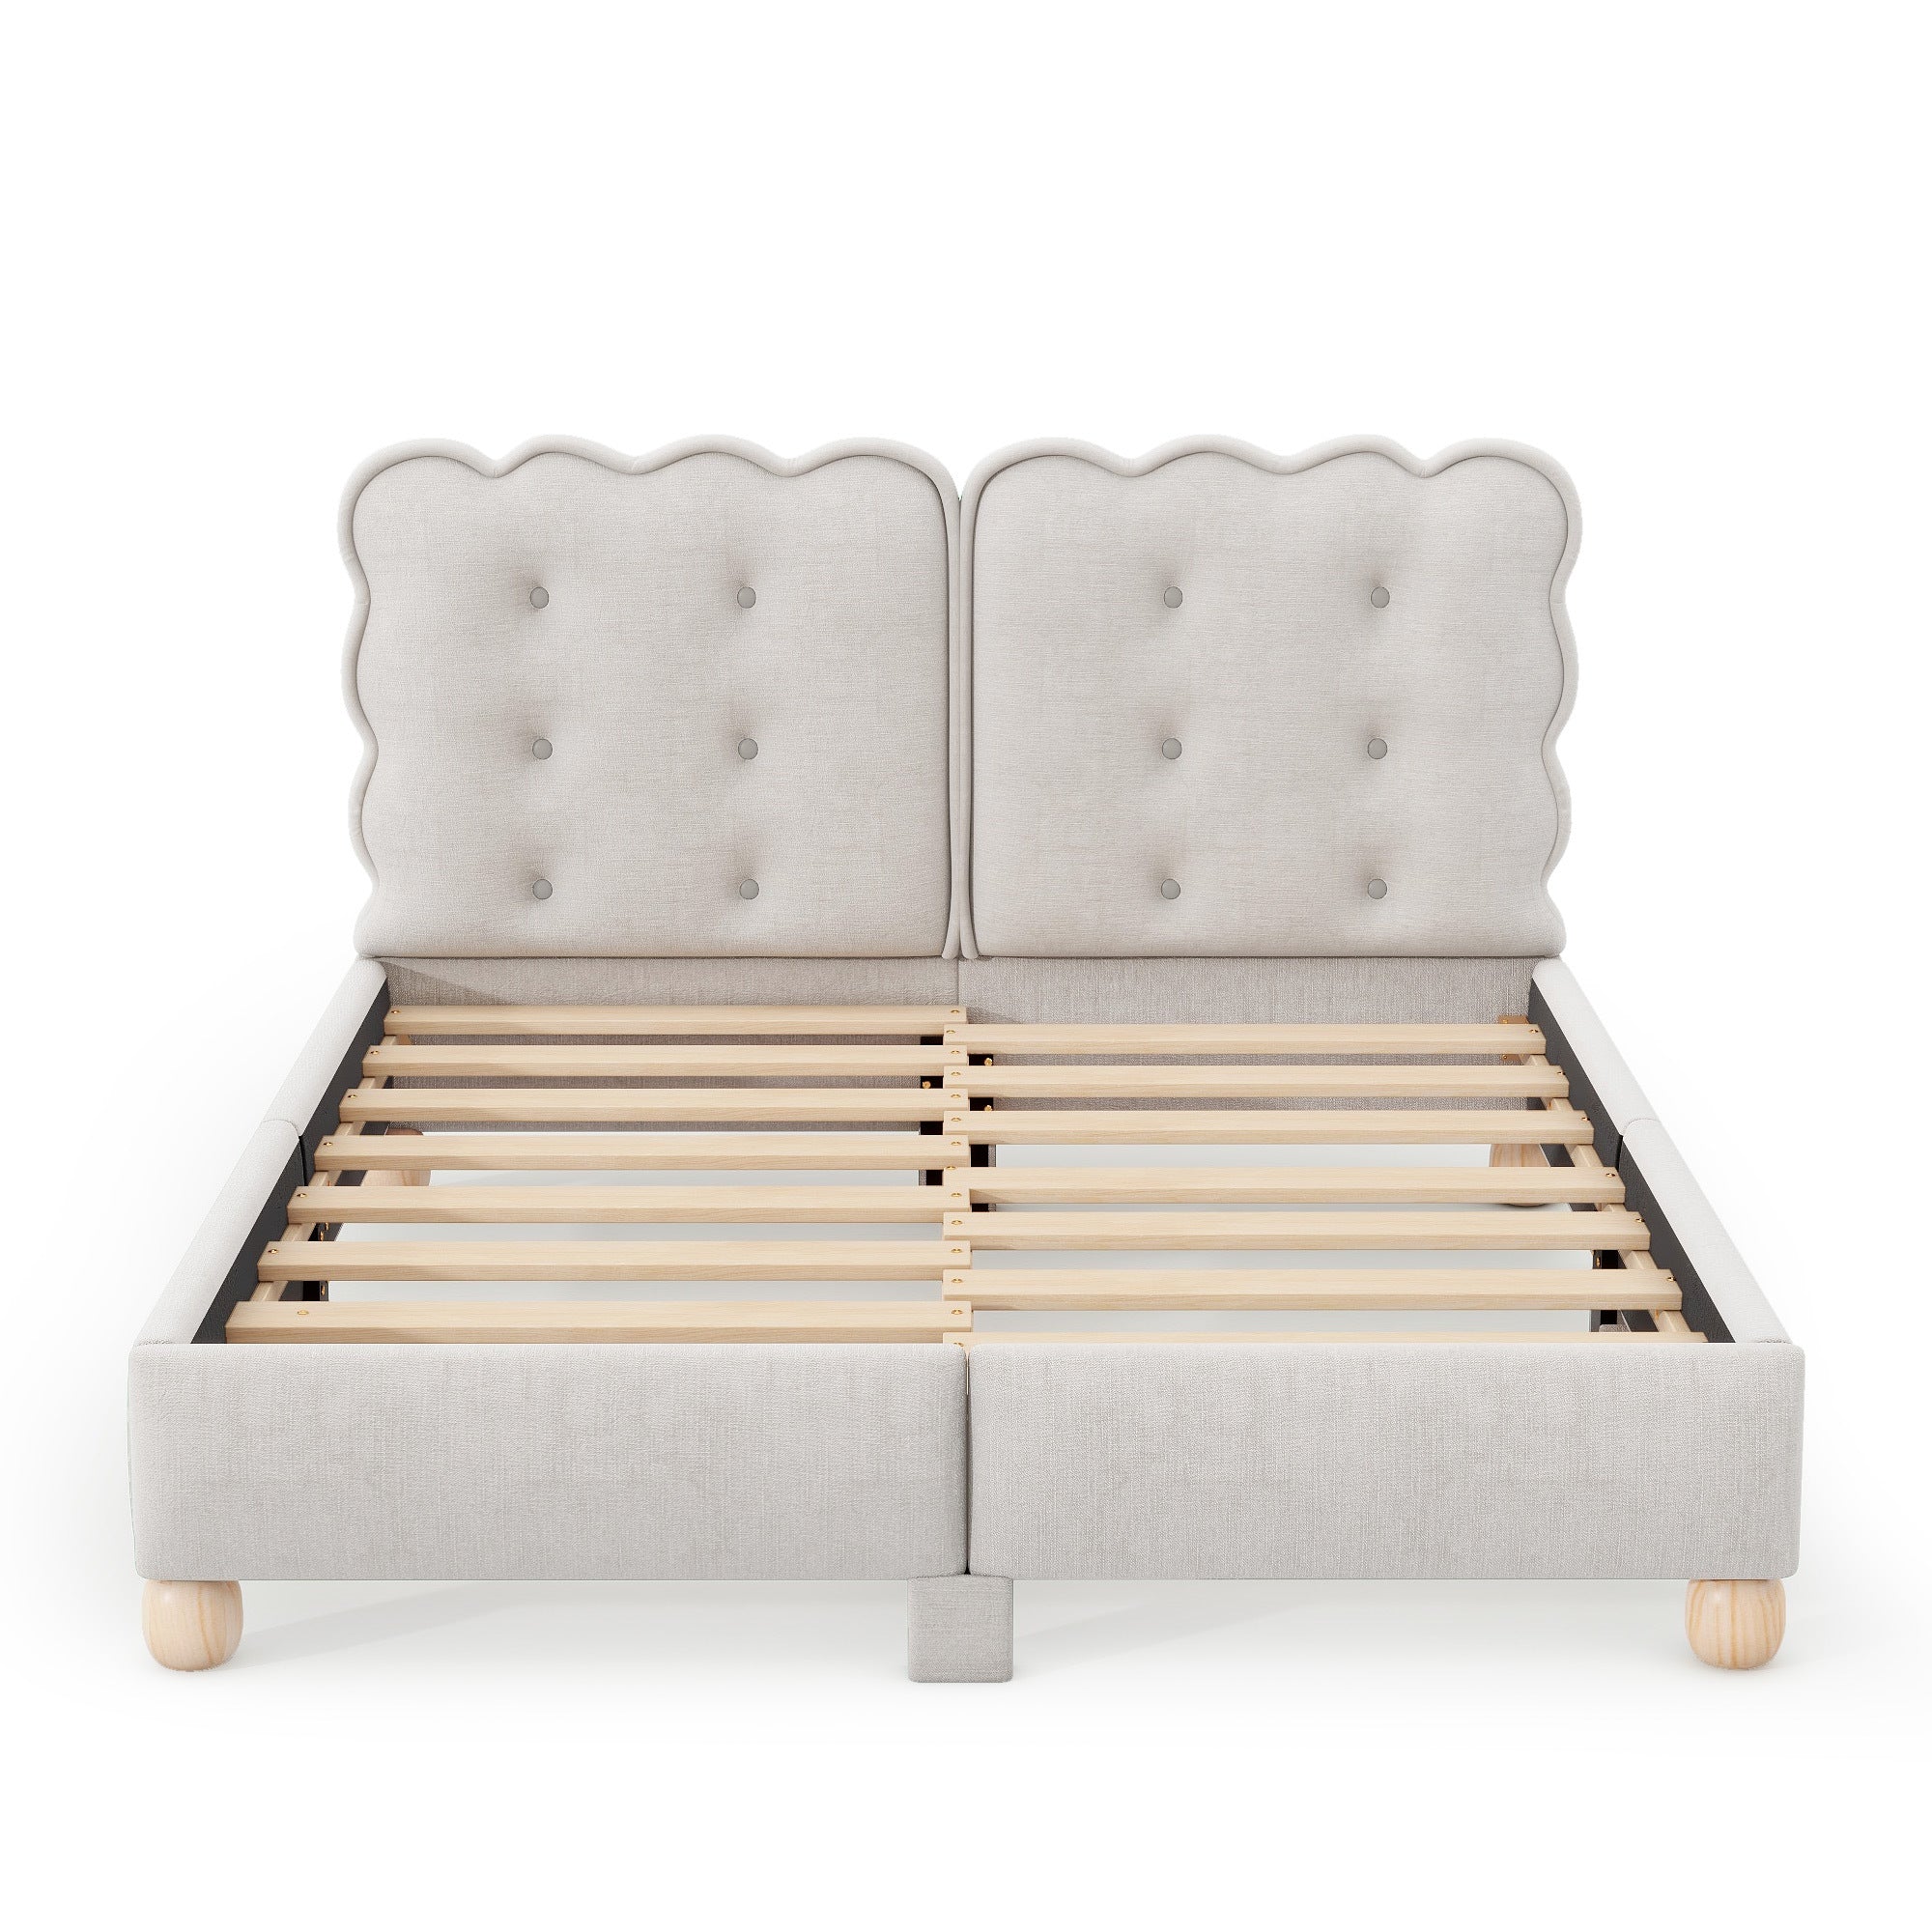 Queen Size Upholstered Platform Bed with Support beige-upholstered